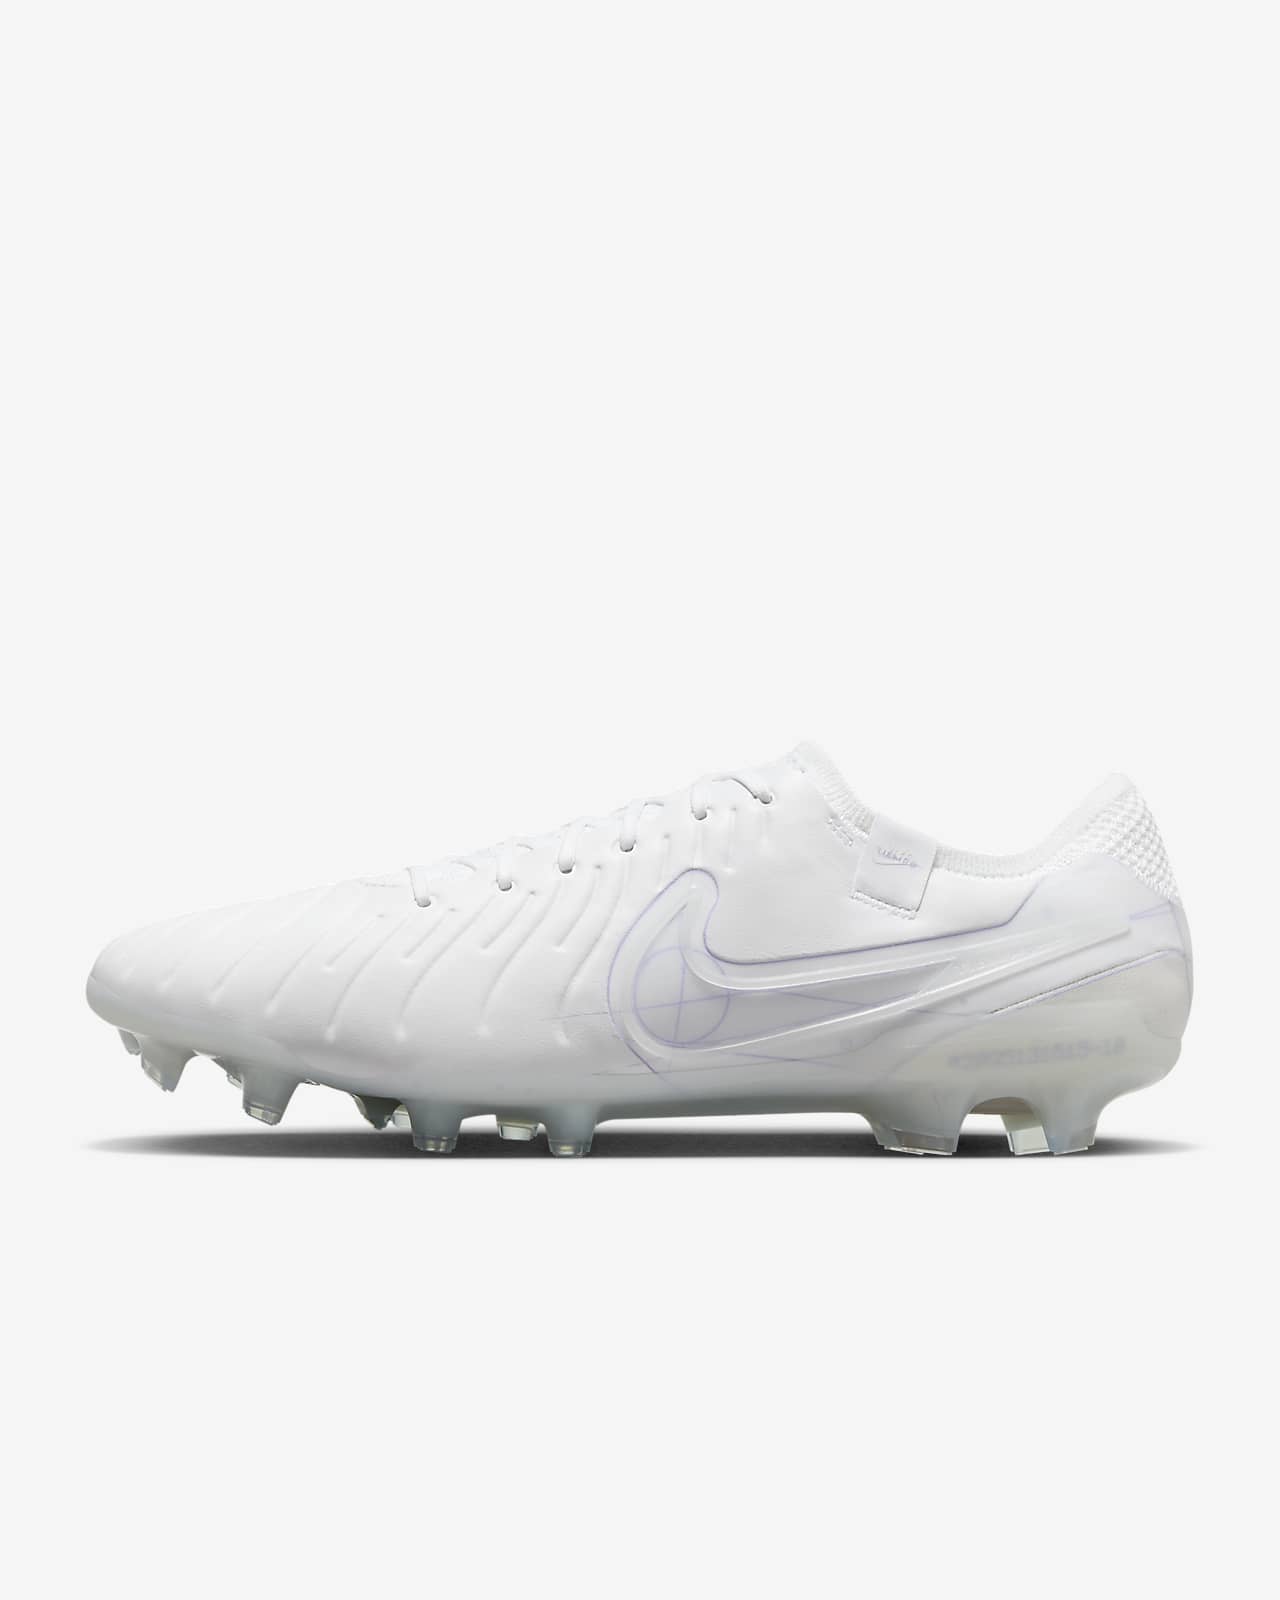 Nike Tiempo Legend 10 Elite Firm-Ground Low-Top Football Boot